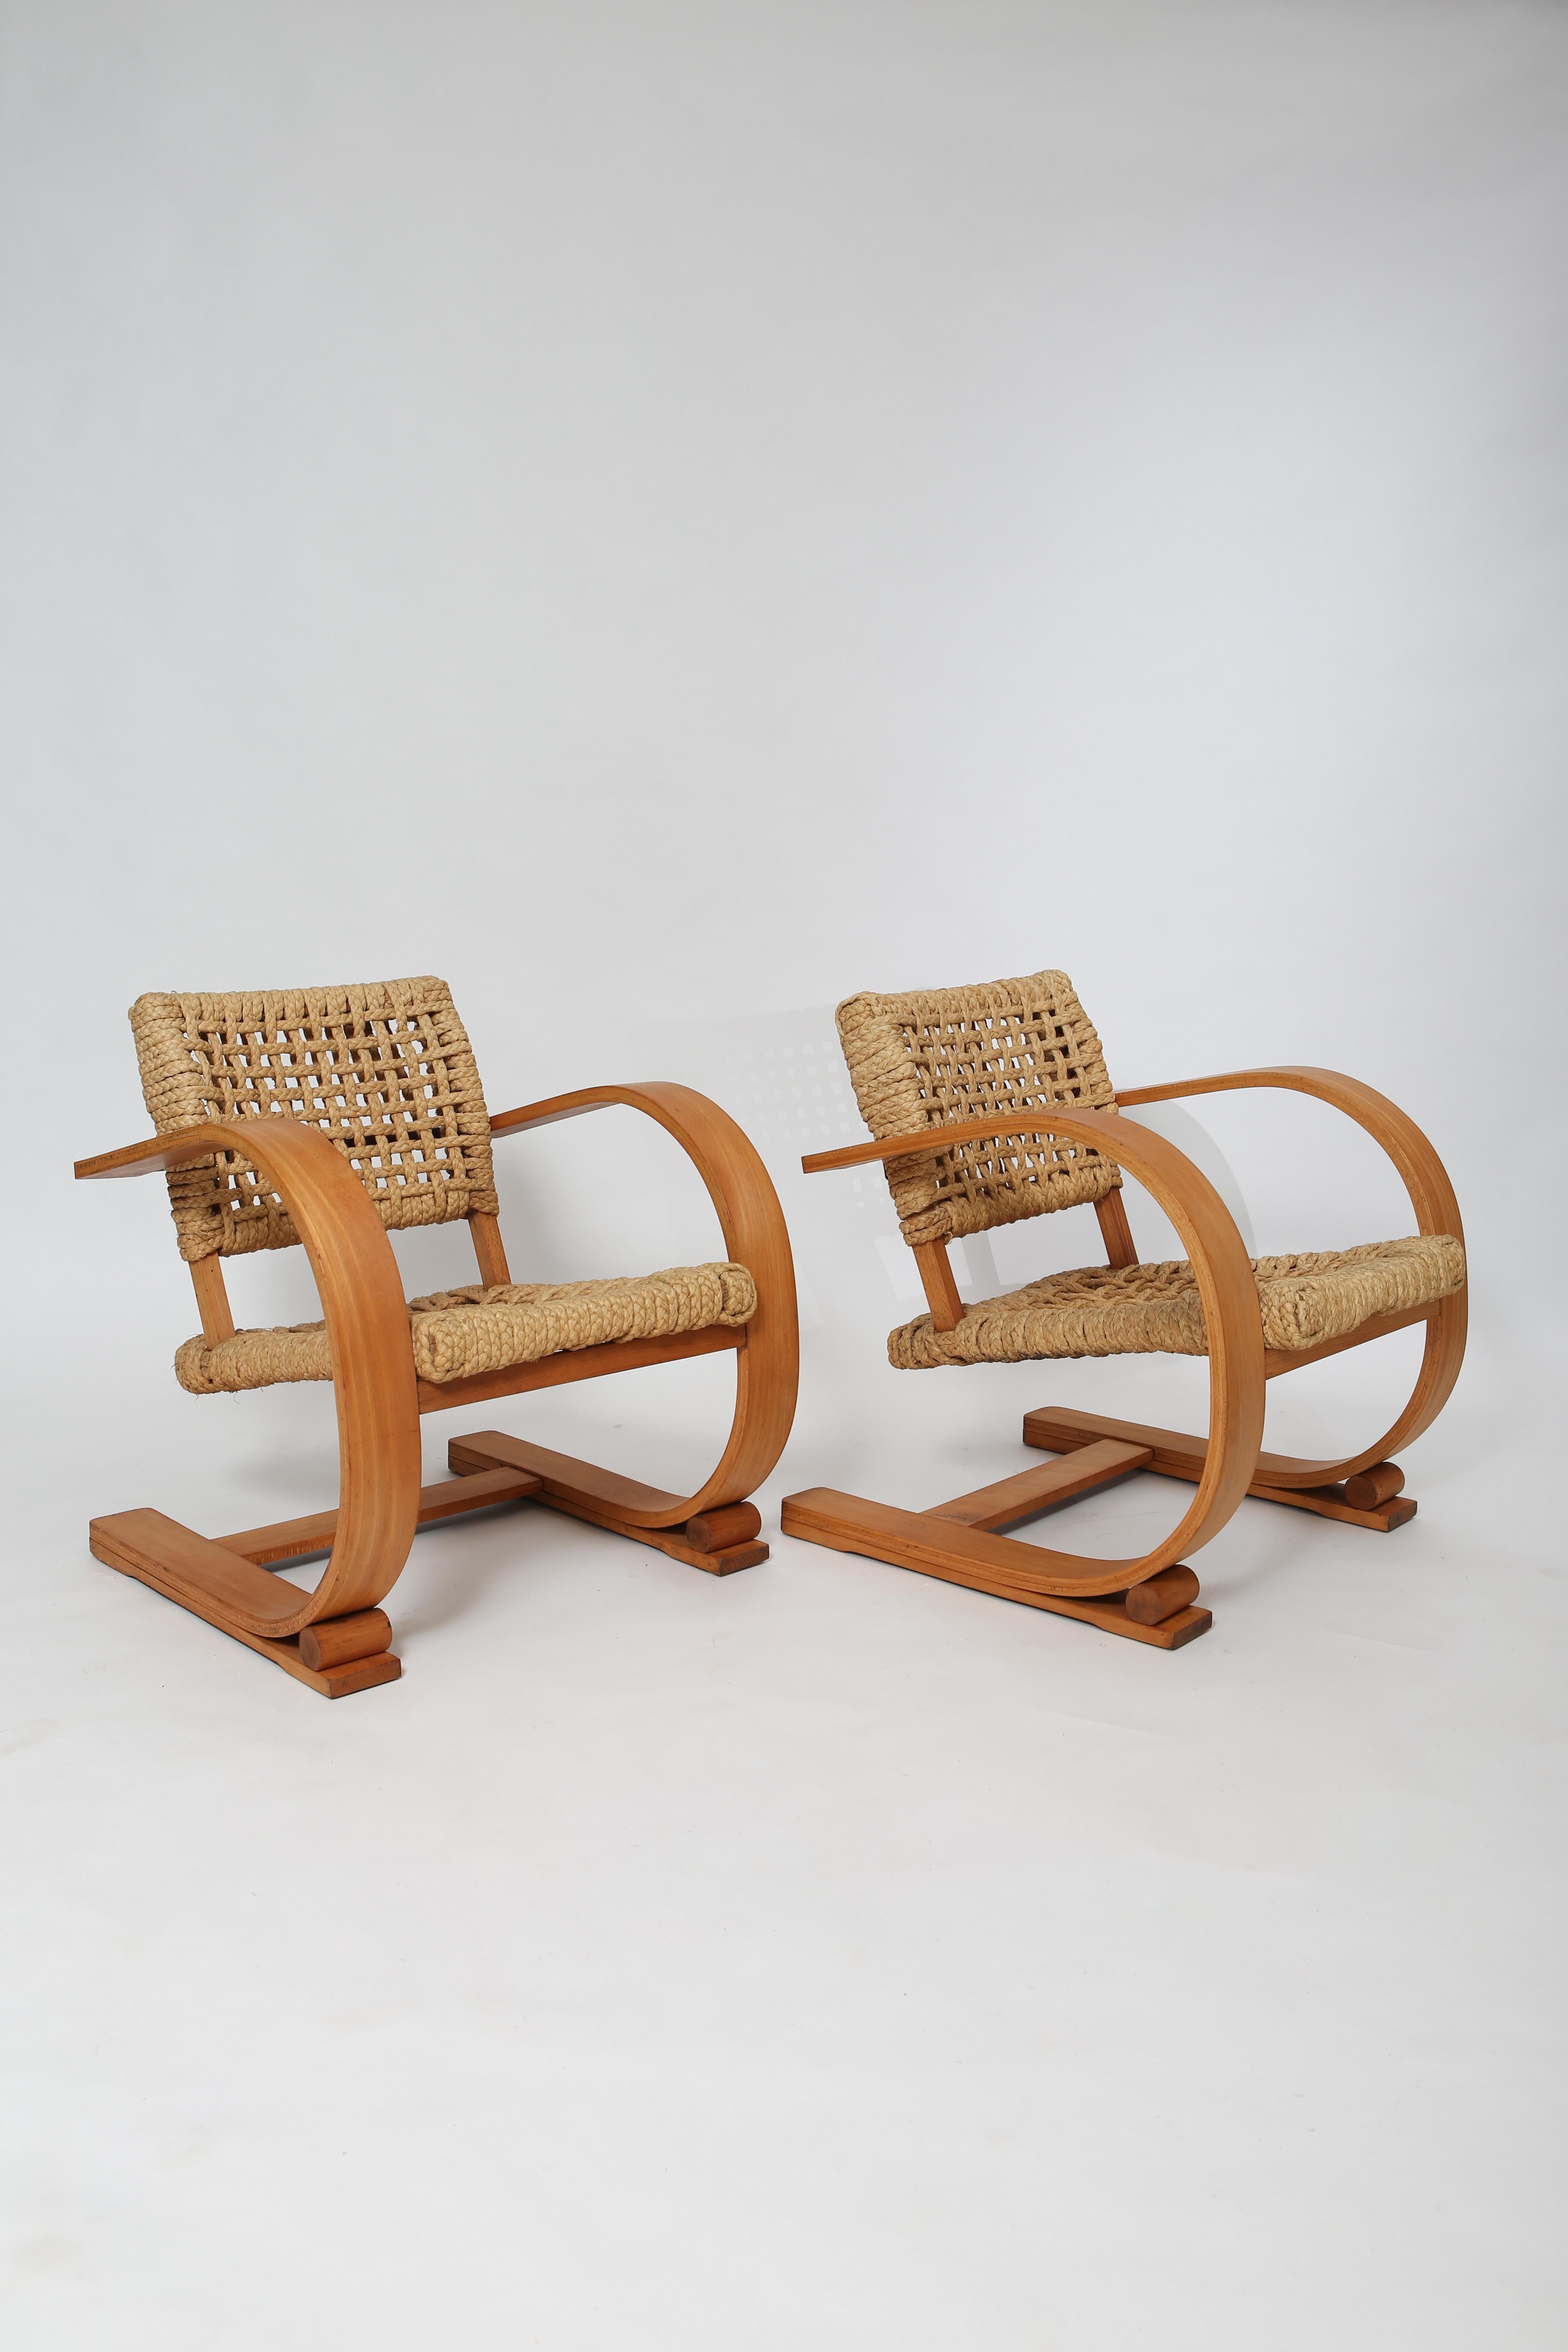 Mid-20th Century French Midcentury Rope Cantilever Chairs by Audoux & Minet For Sale